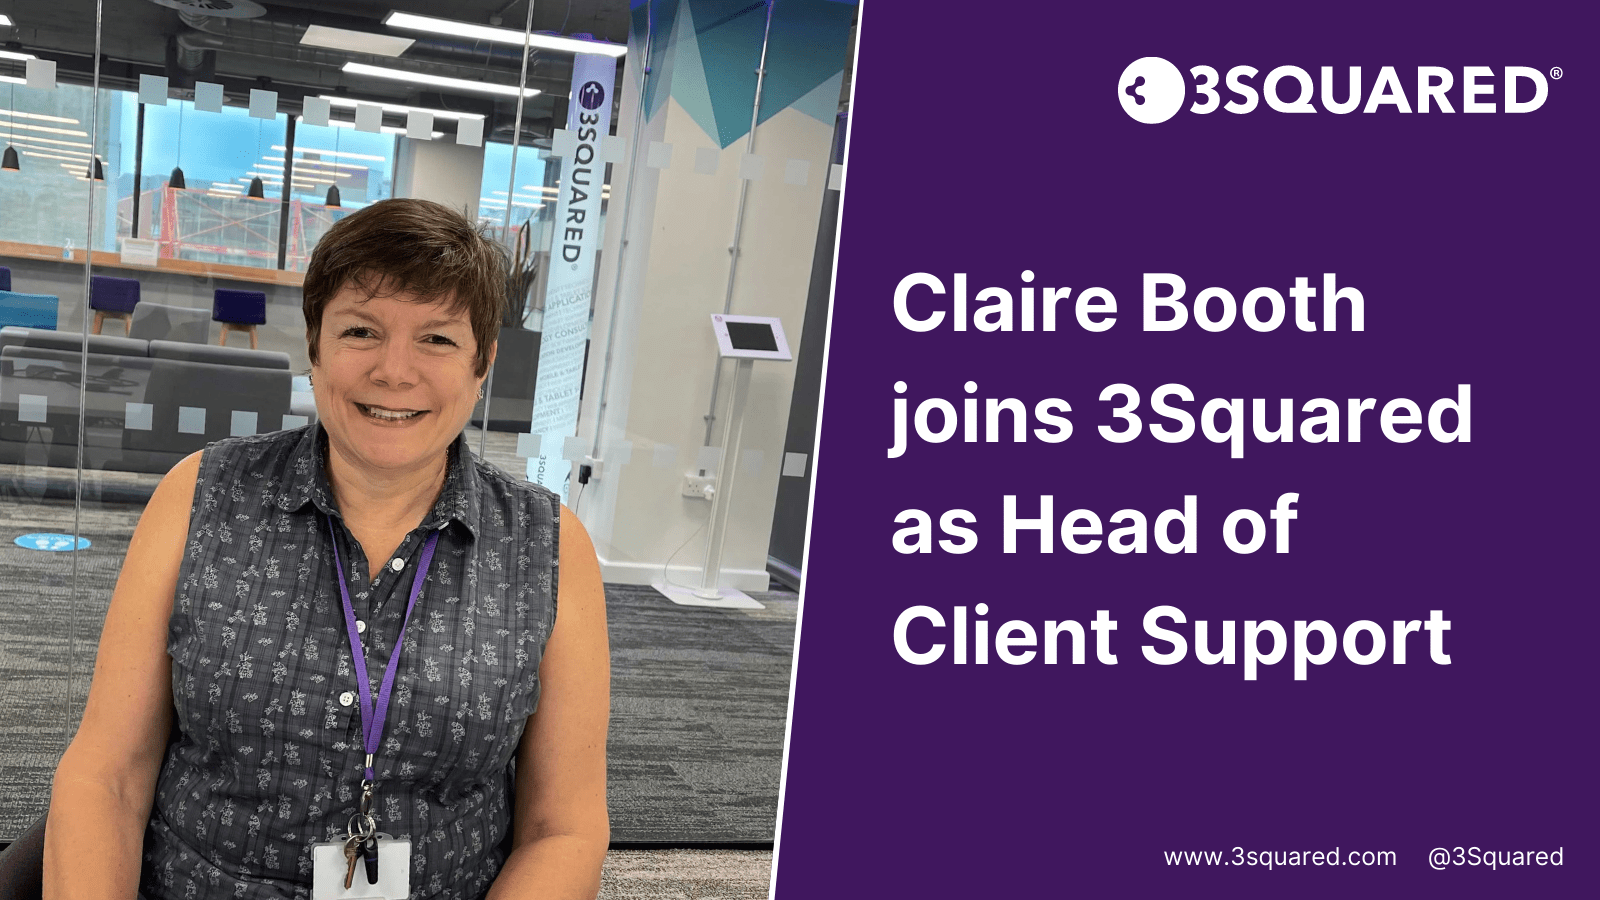 Claire Booth, Head of Customer Support